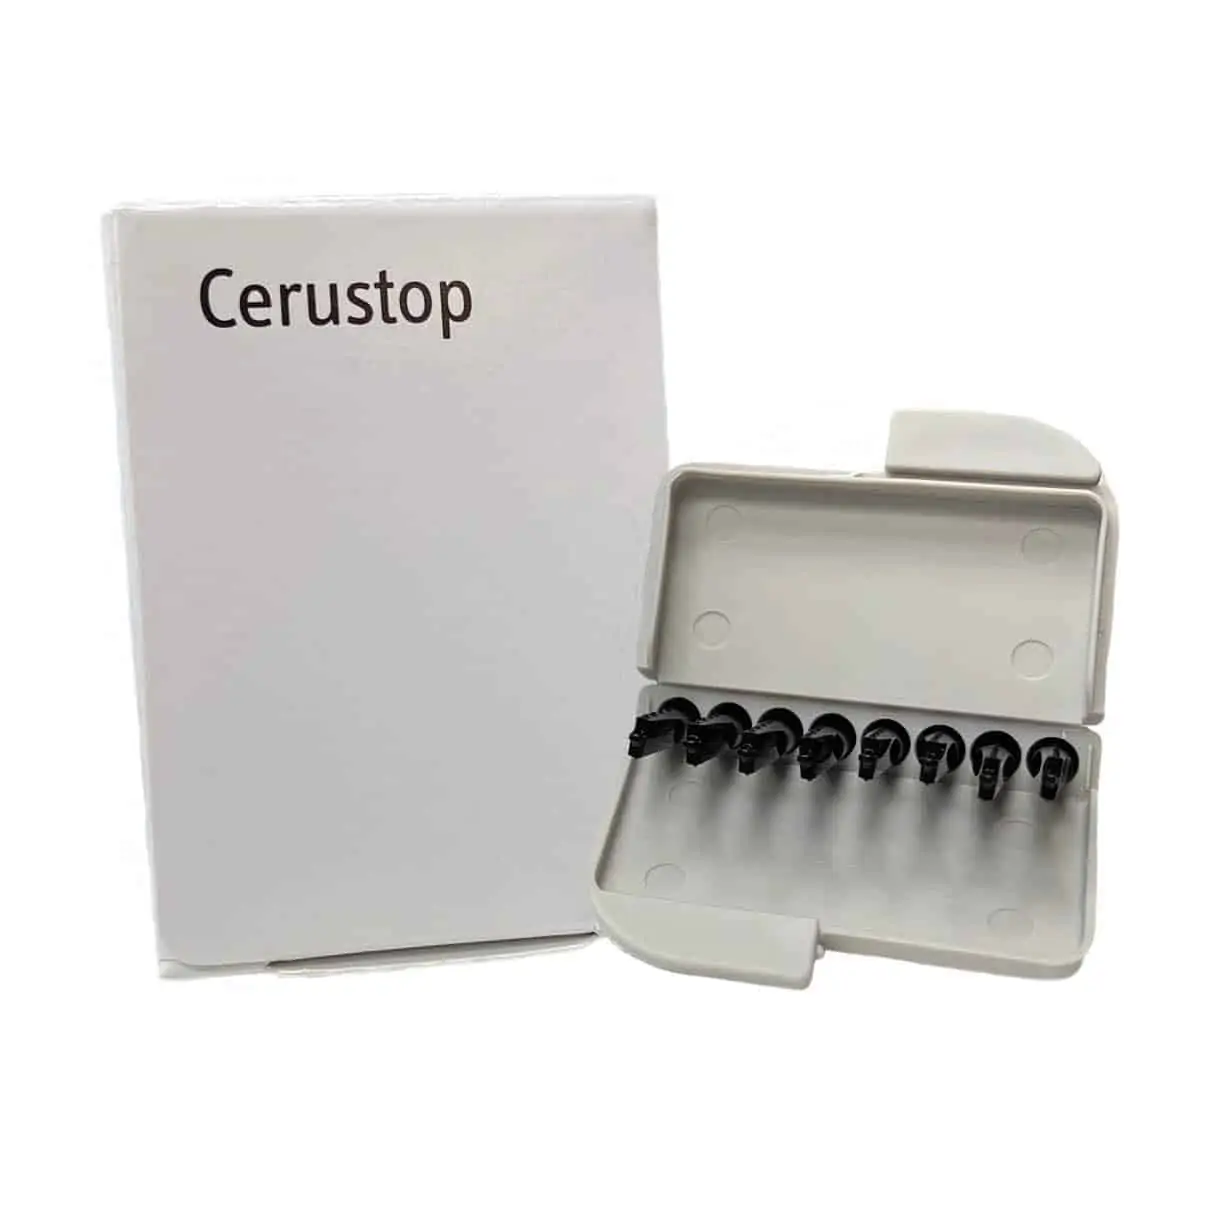 Land Of later Waardeloos Cerustop Wax Guards - Hearing Aid Filters | Hearing Group